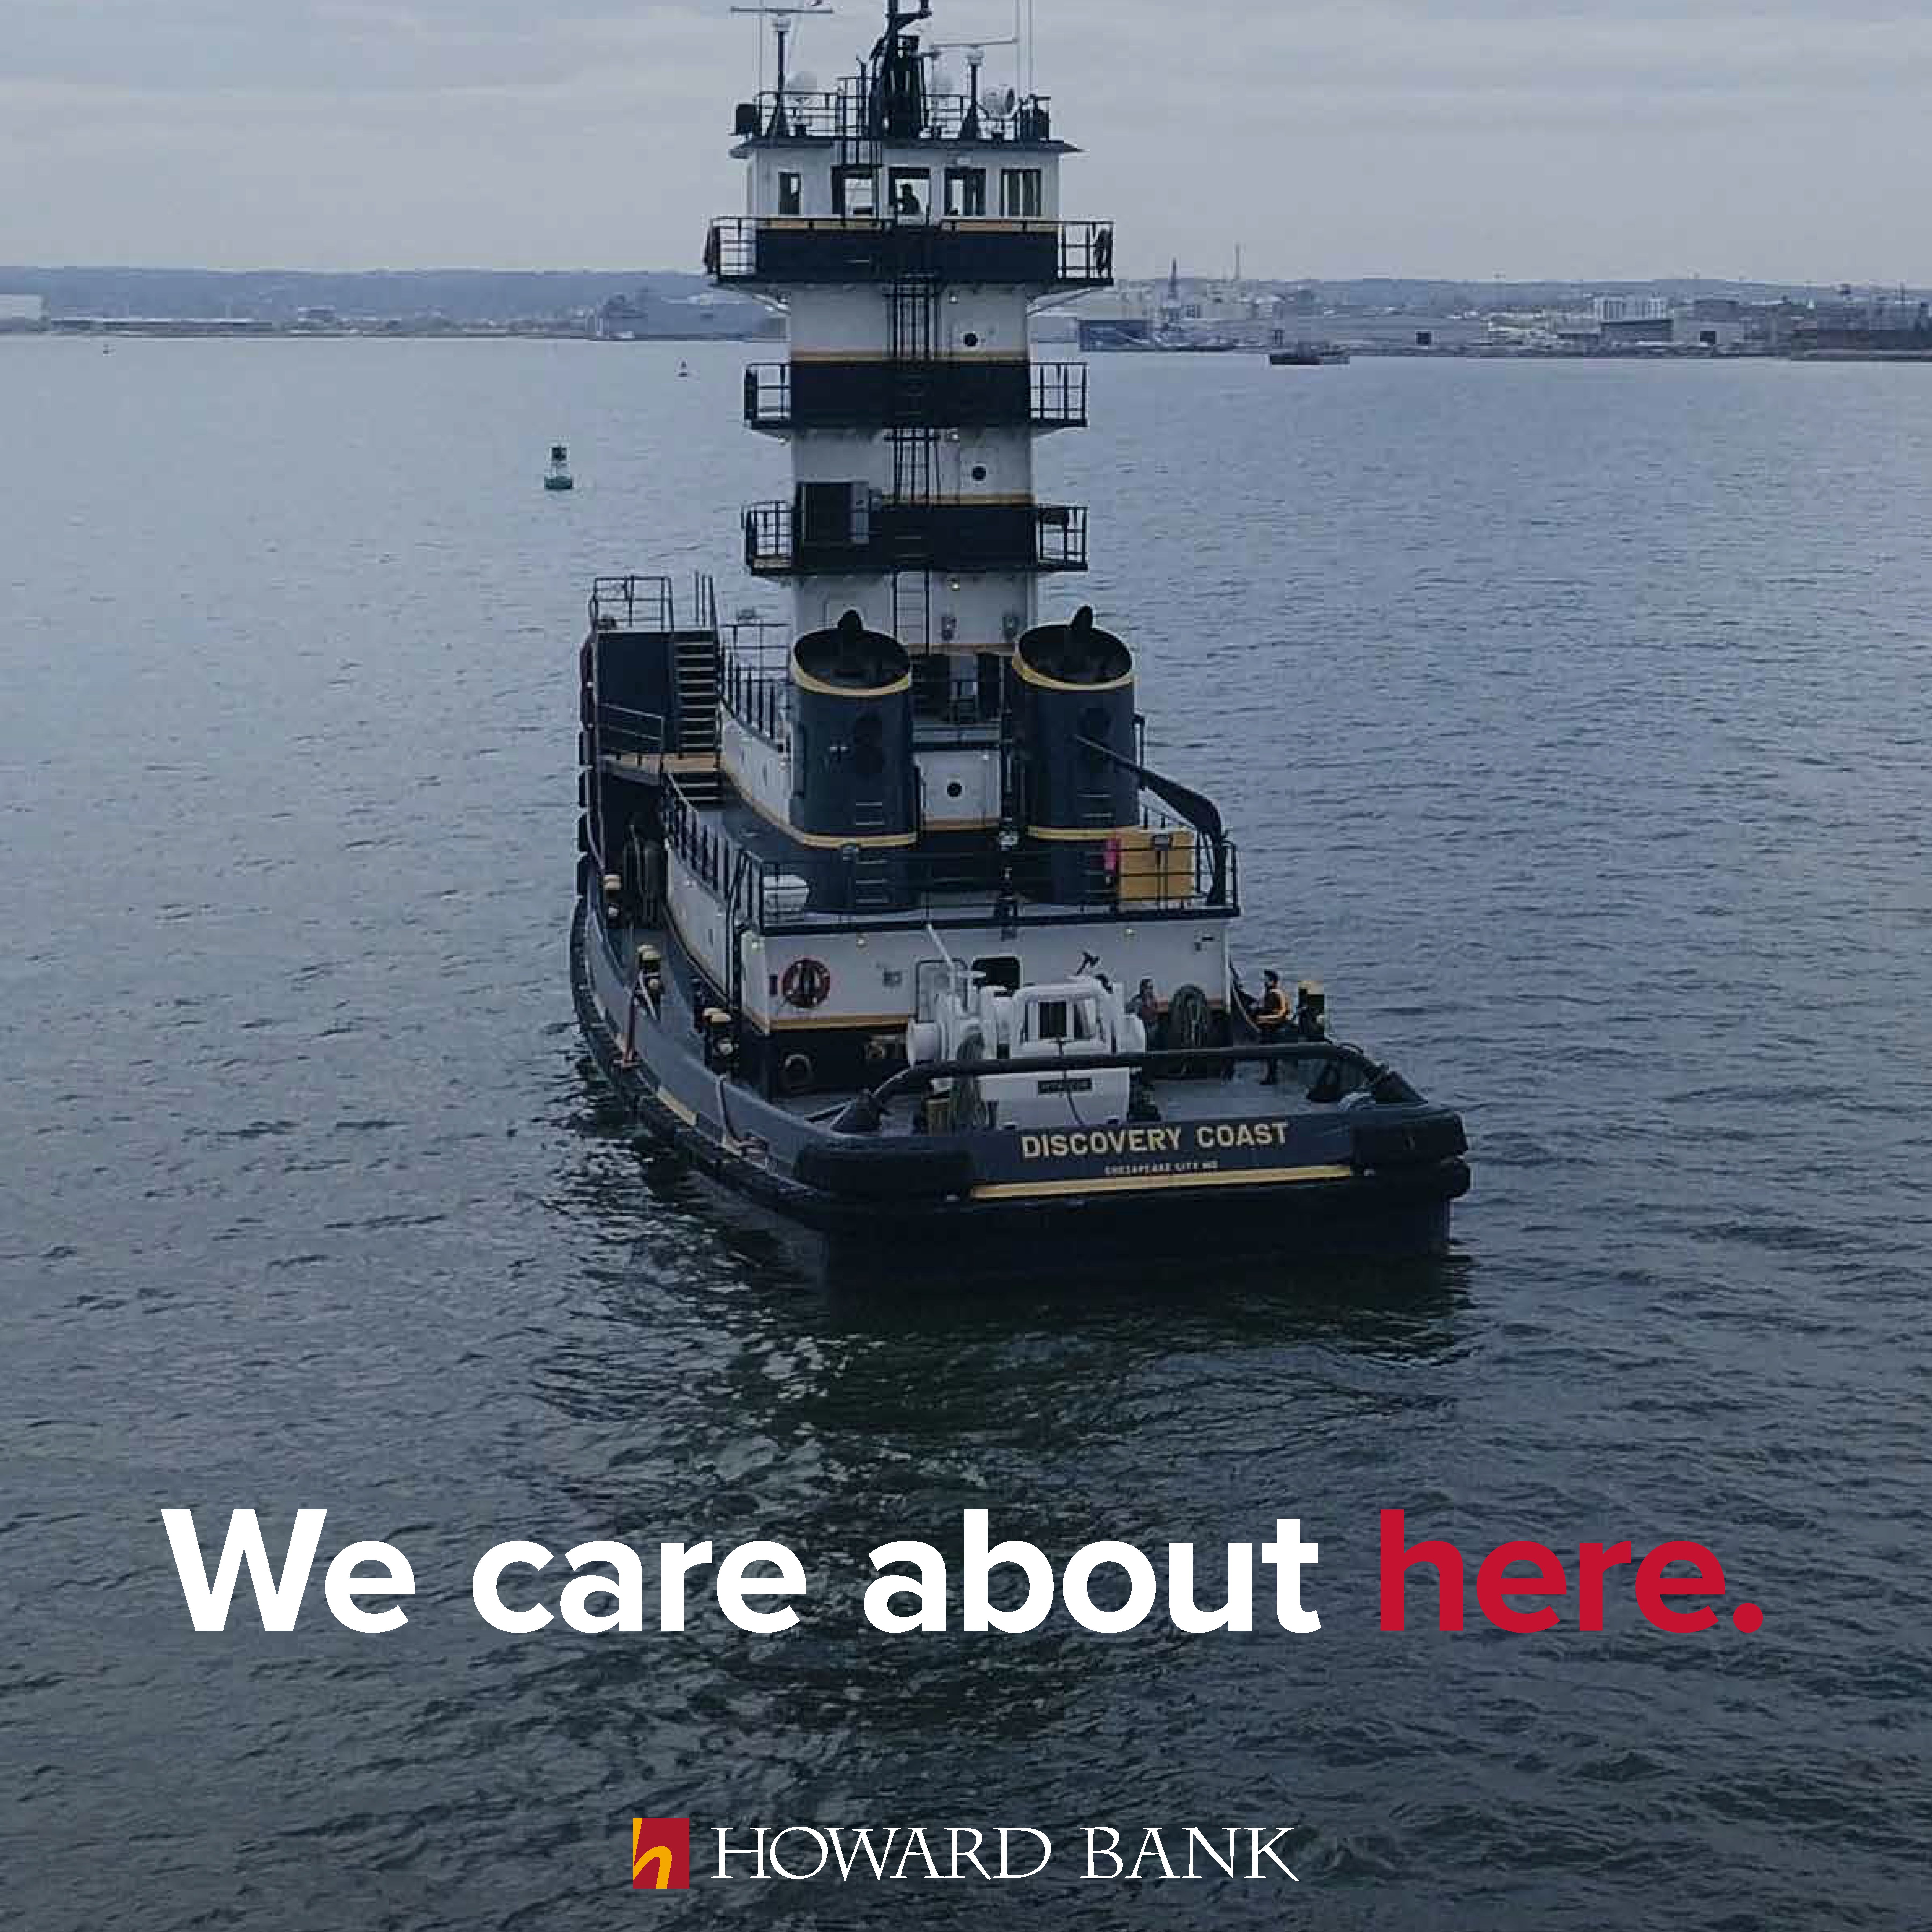 Howard Bank commissioned multiple pieces of creative content as part of their brand campaign.